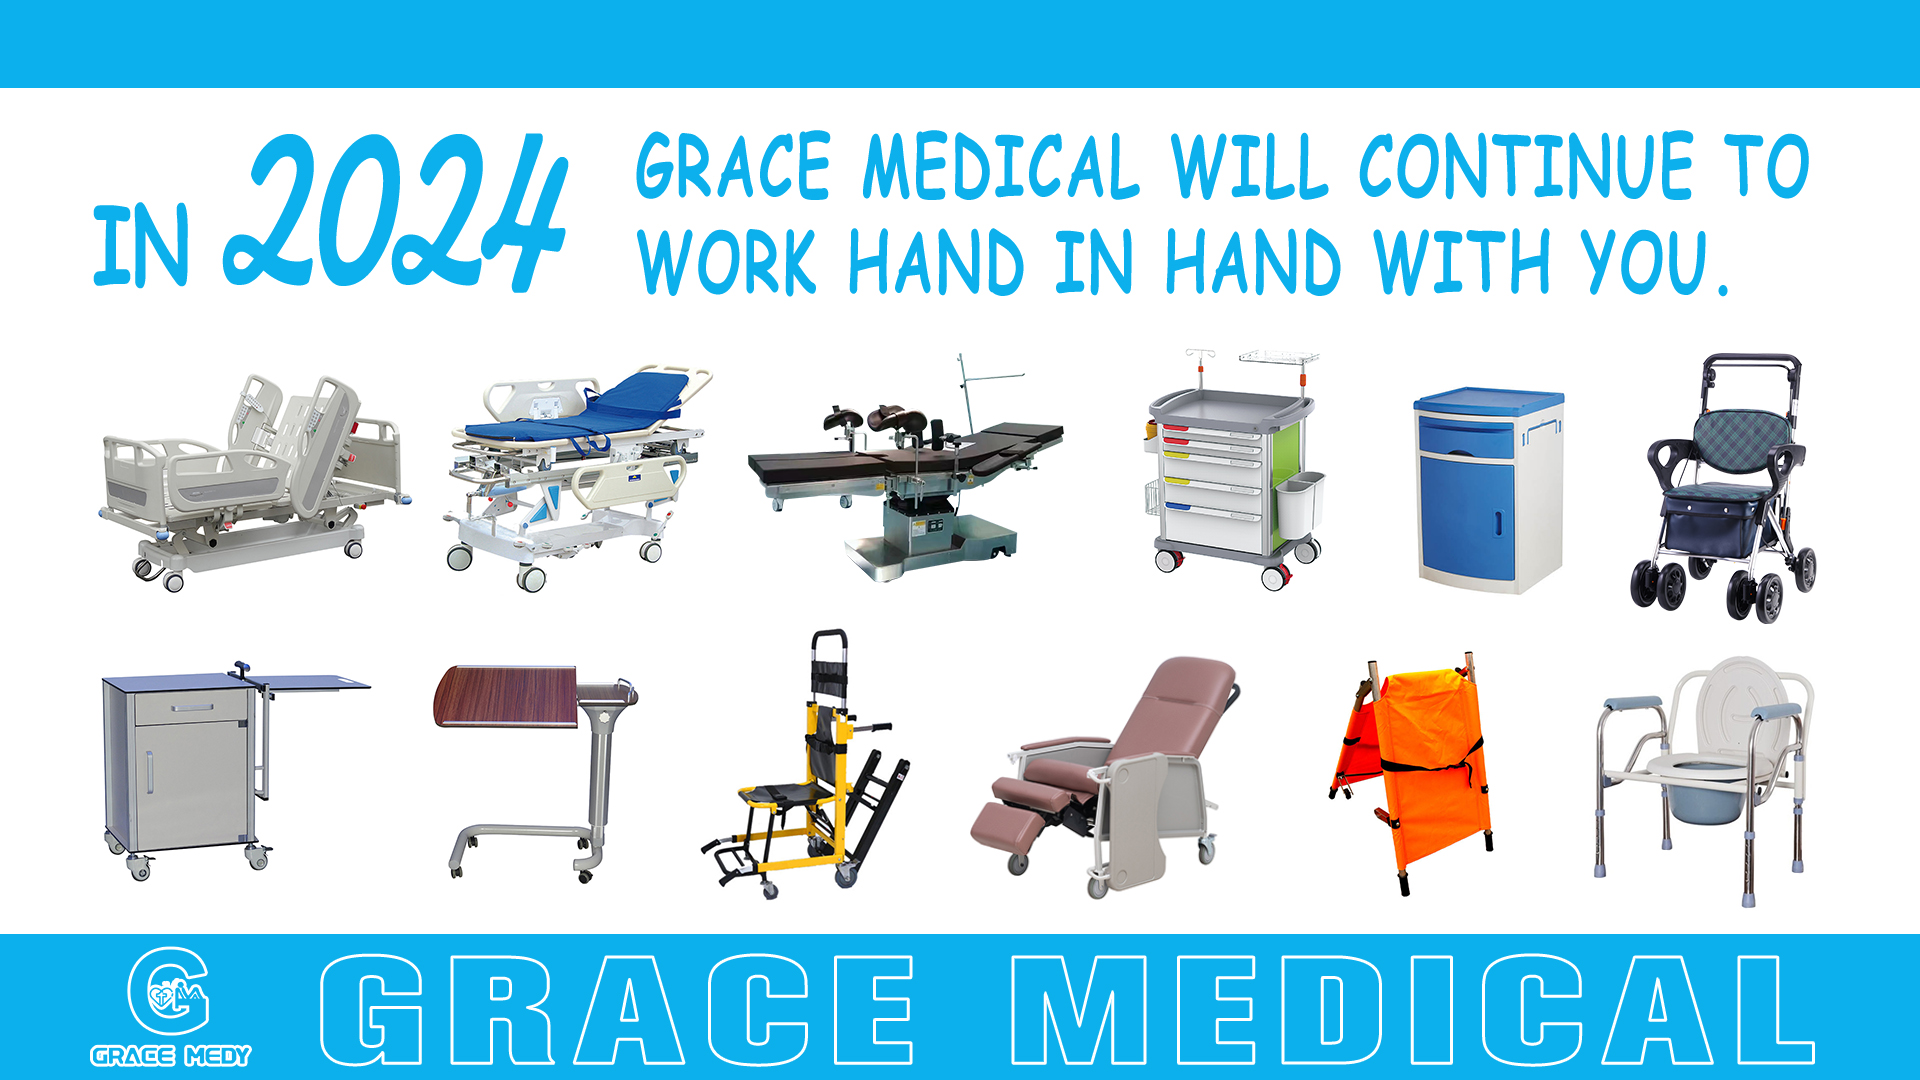 Grace Medical will accompany you into 2024.